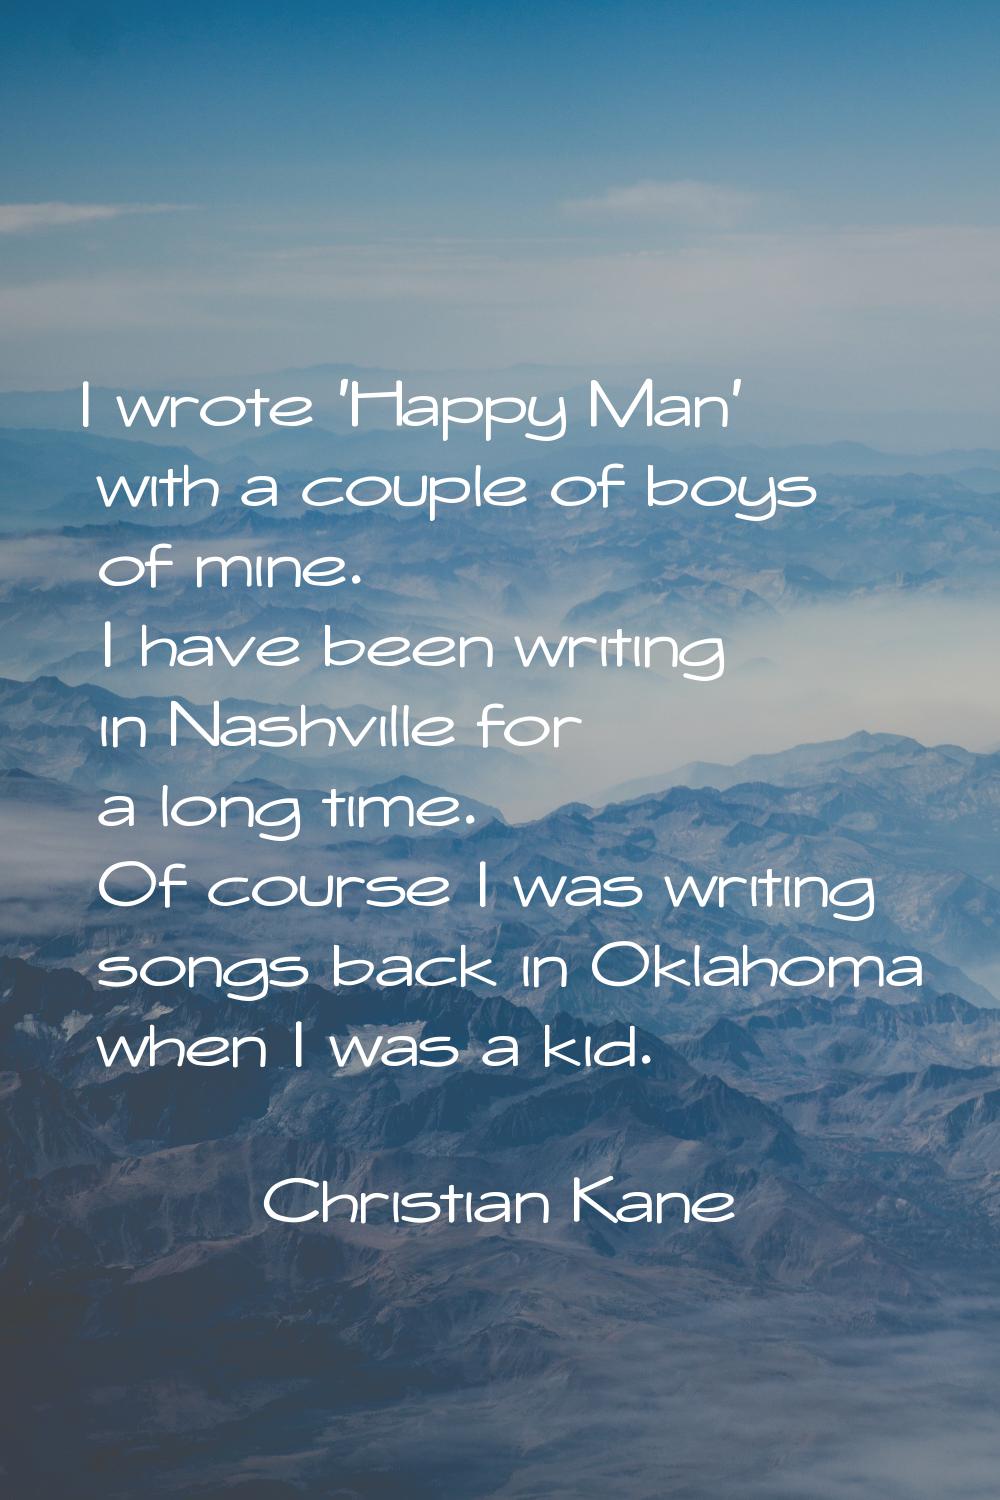 I wrote 'Happy Man' with a couple of boys of mine. I have been writing in Nashville for a long time